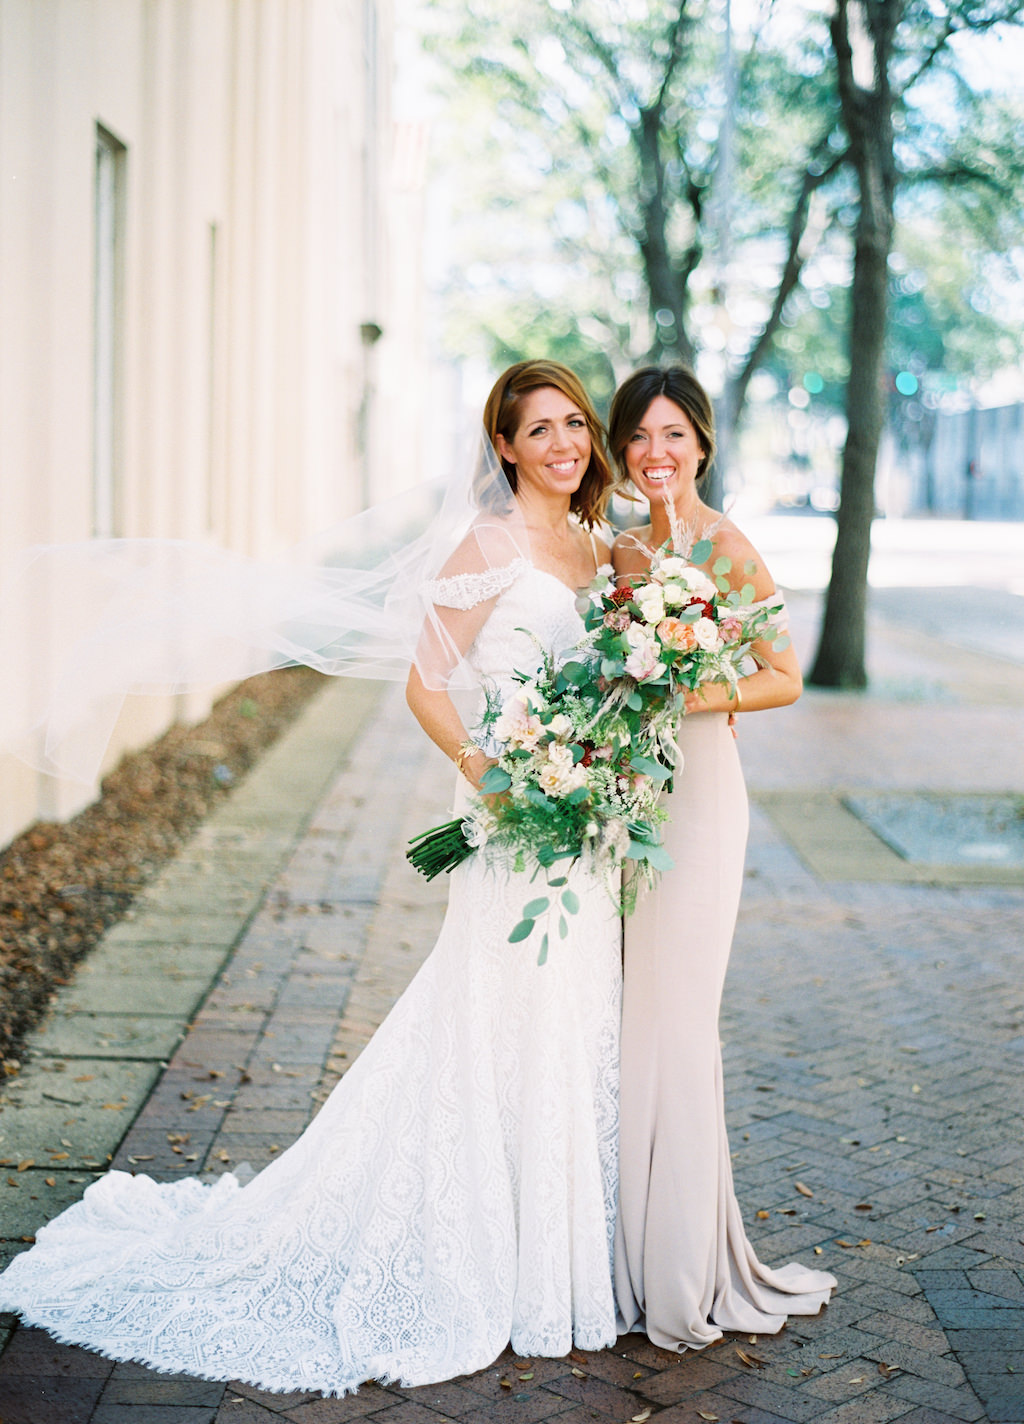 Outdoor Downtown Bride and Bridesmaid Portrait with Blush Pink, Red, and White Floral with Natural Greenery Bouquet, Bridesmaid in Ivory Column Revolve Dress, Bride in Off The Shoulder Madeline Gardner Dress